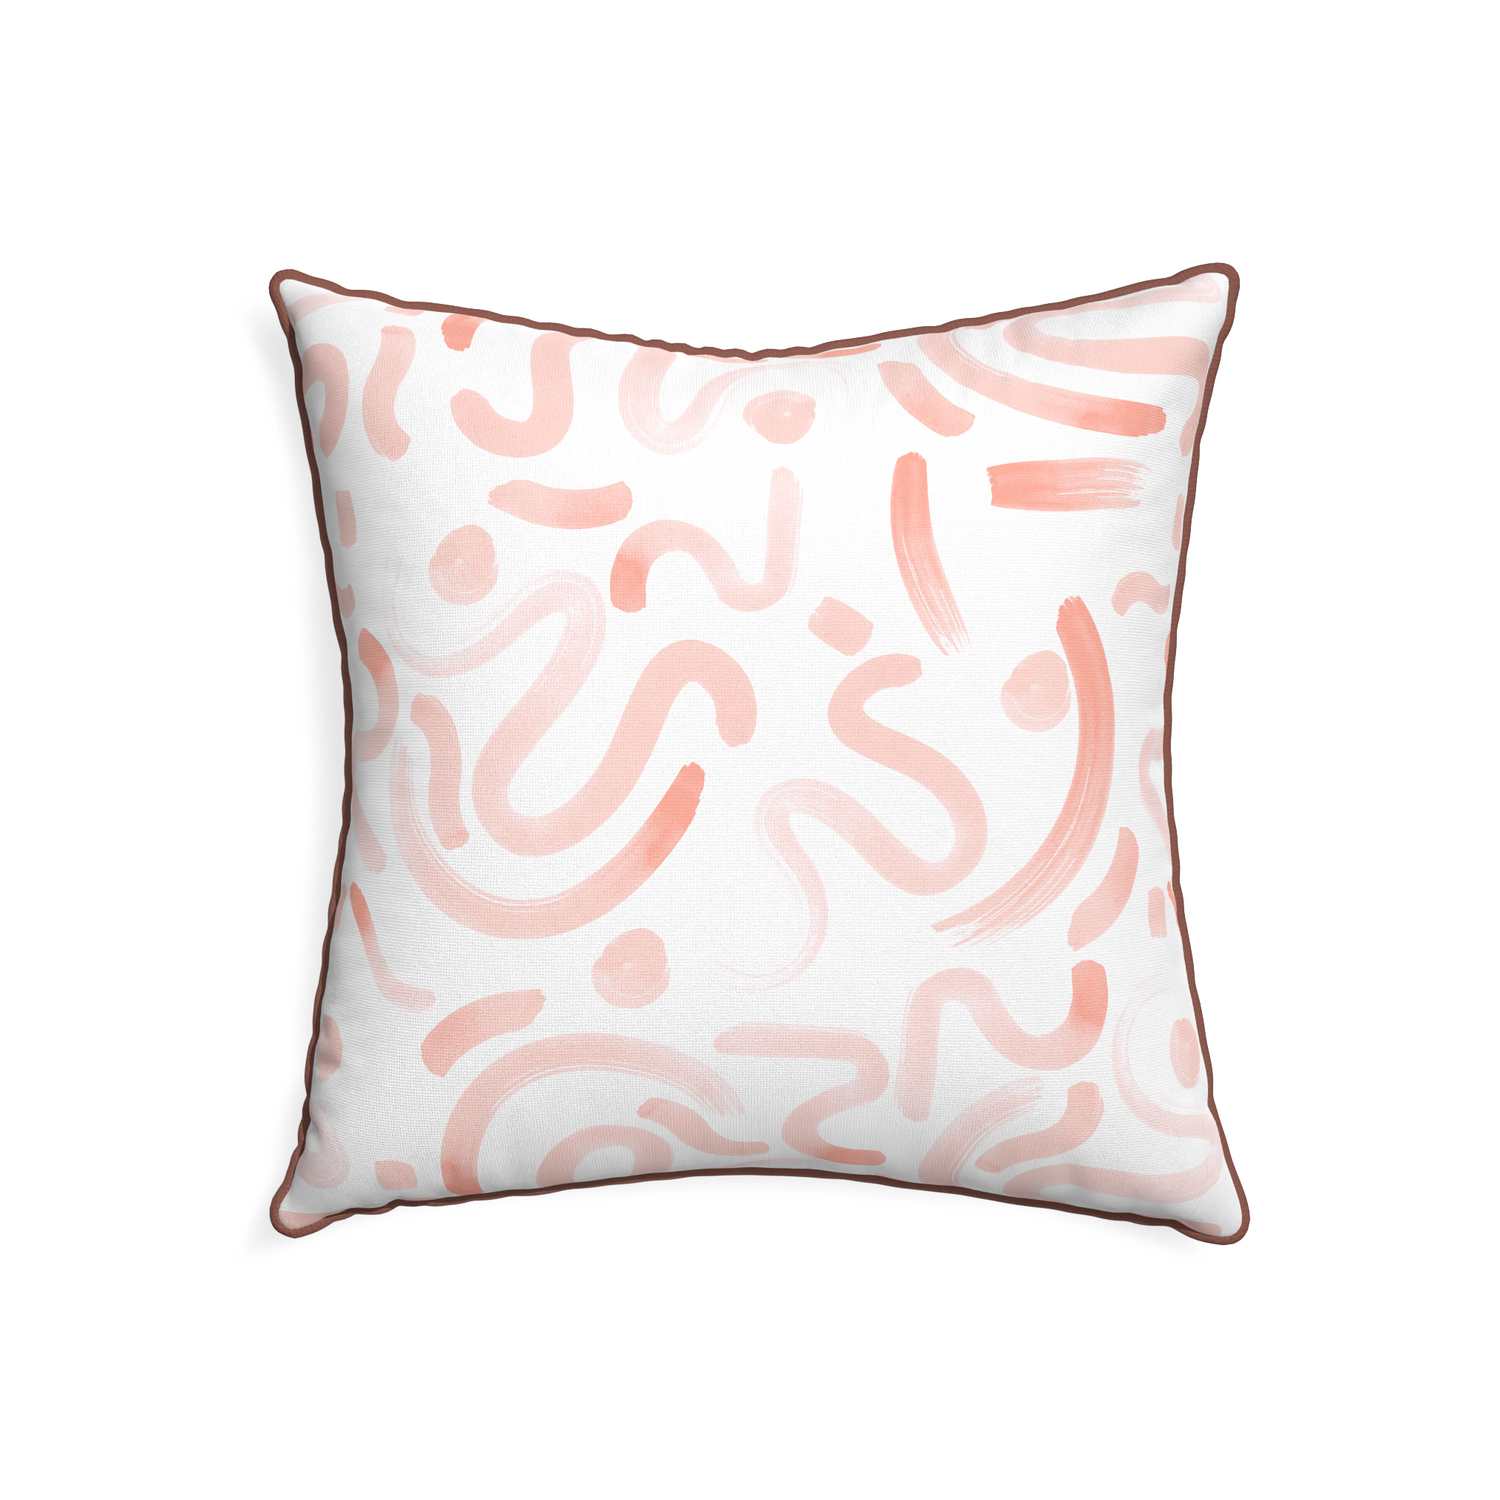 22-square hockney pink custom pink graphicpillow with w piping on white background